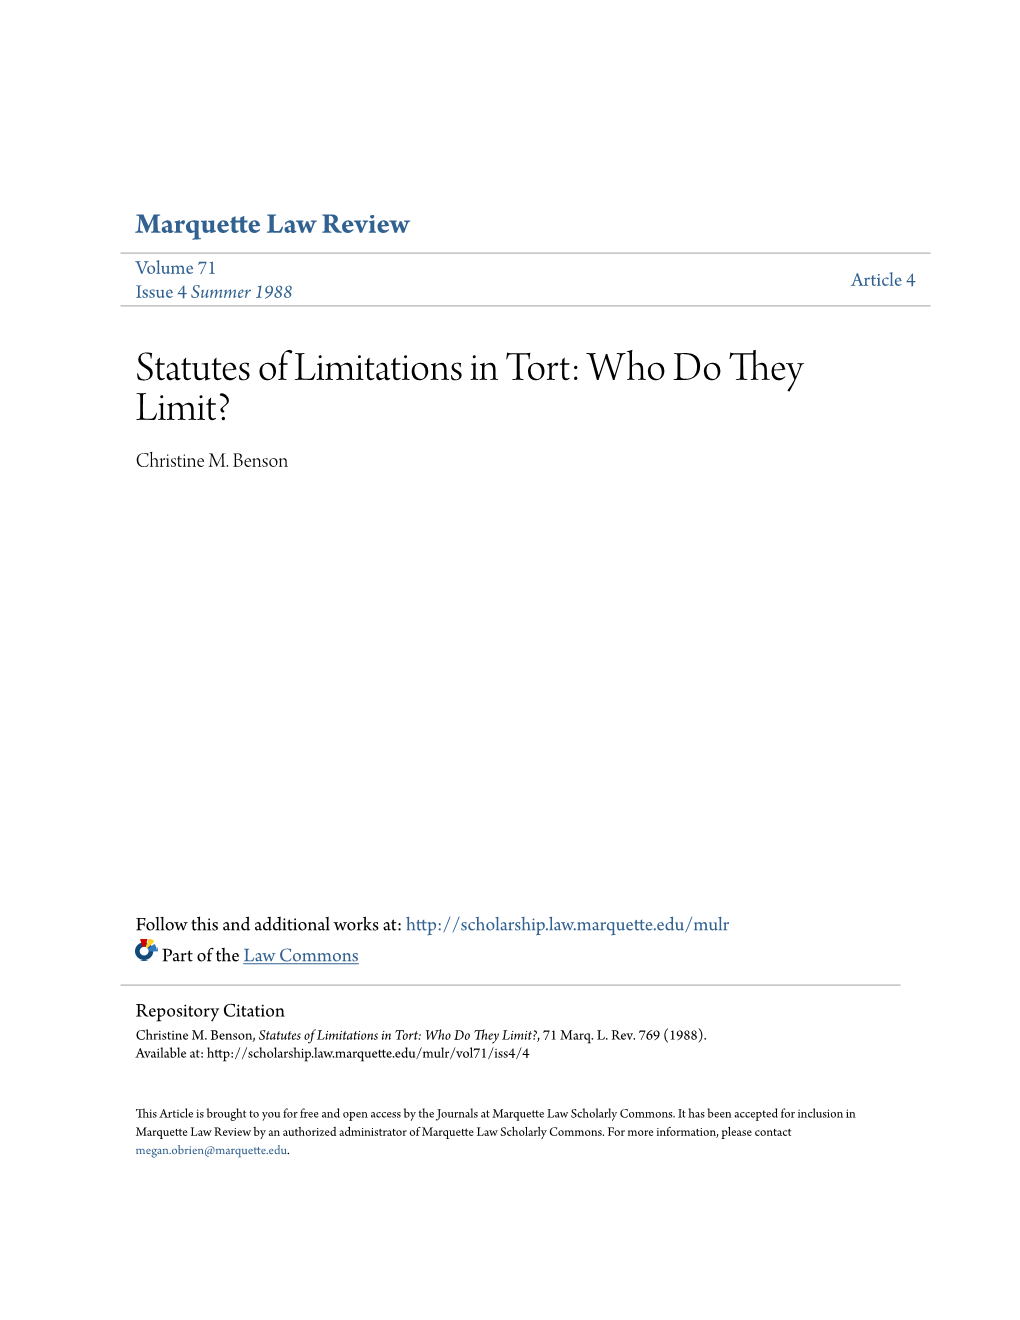 Statutes of Limitations in Tort: Who Do They Limit? Christine M